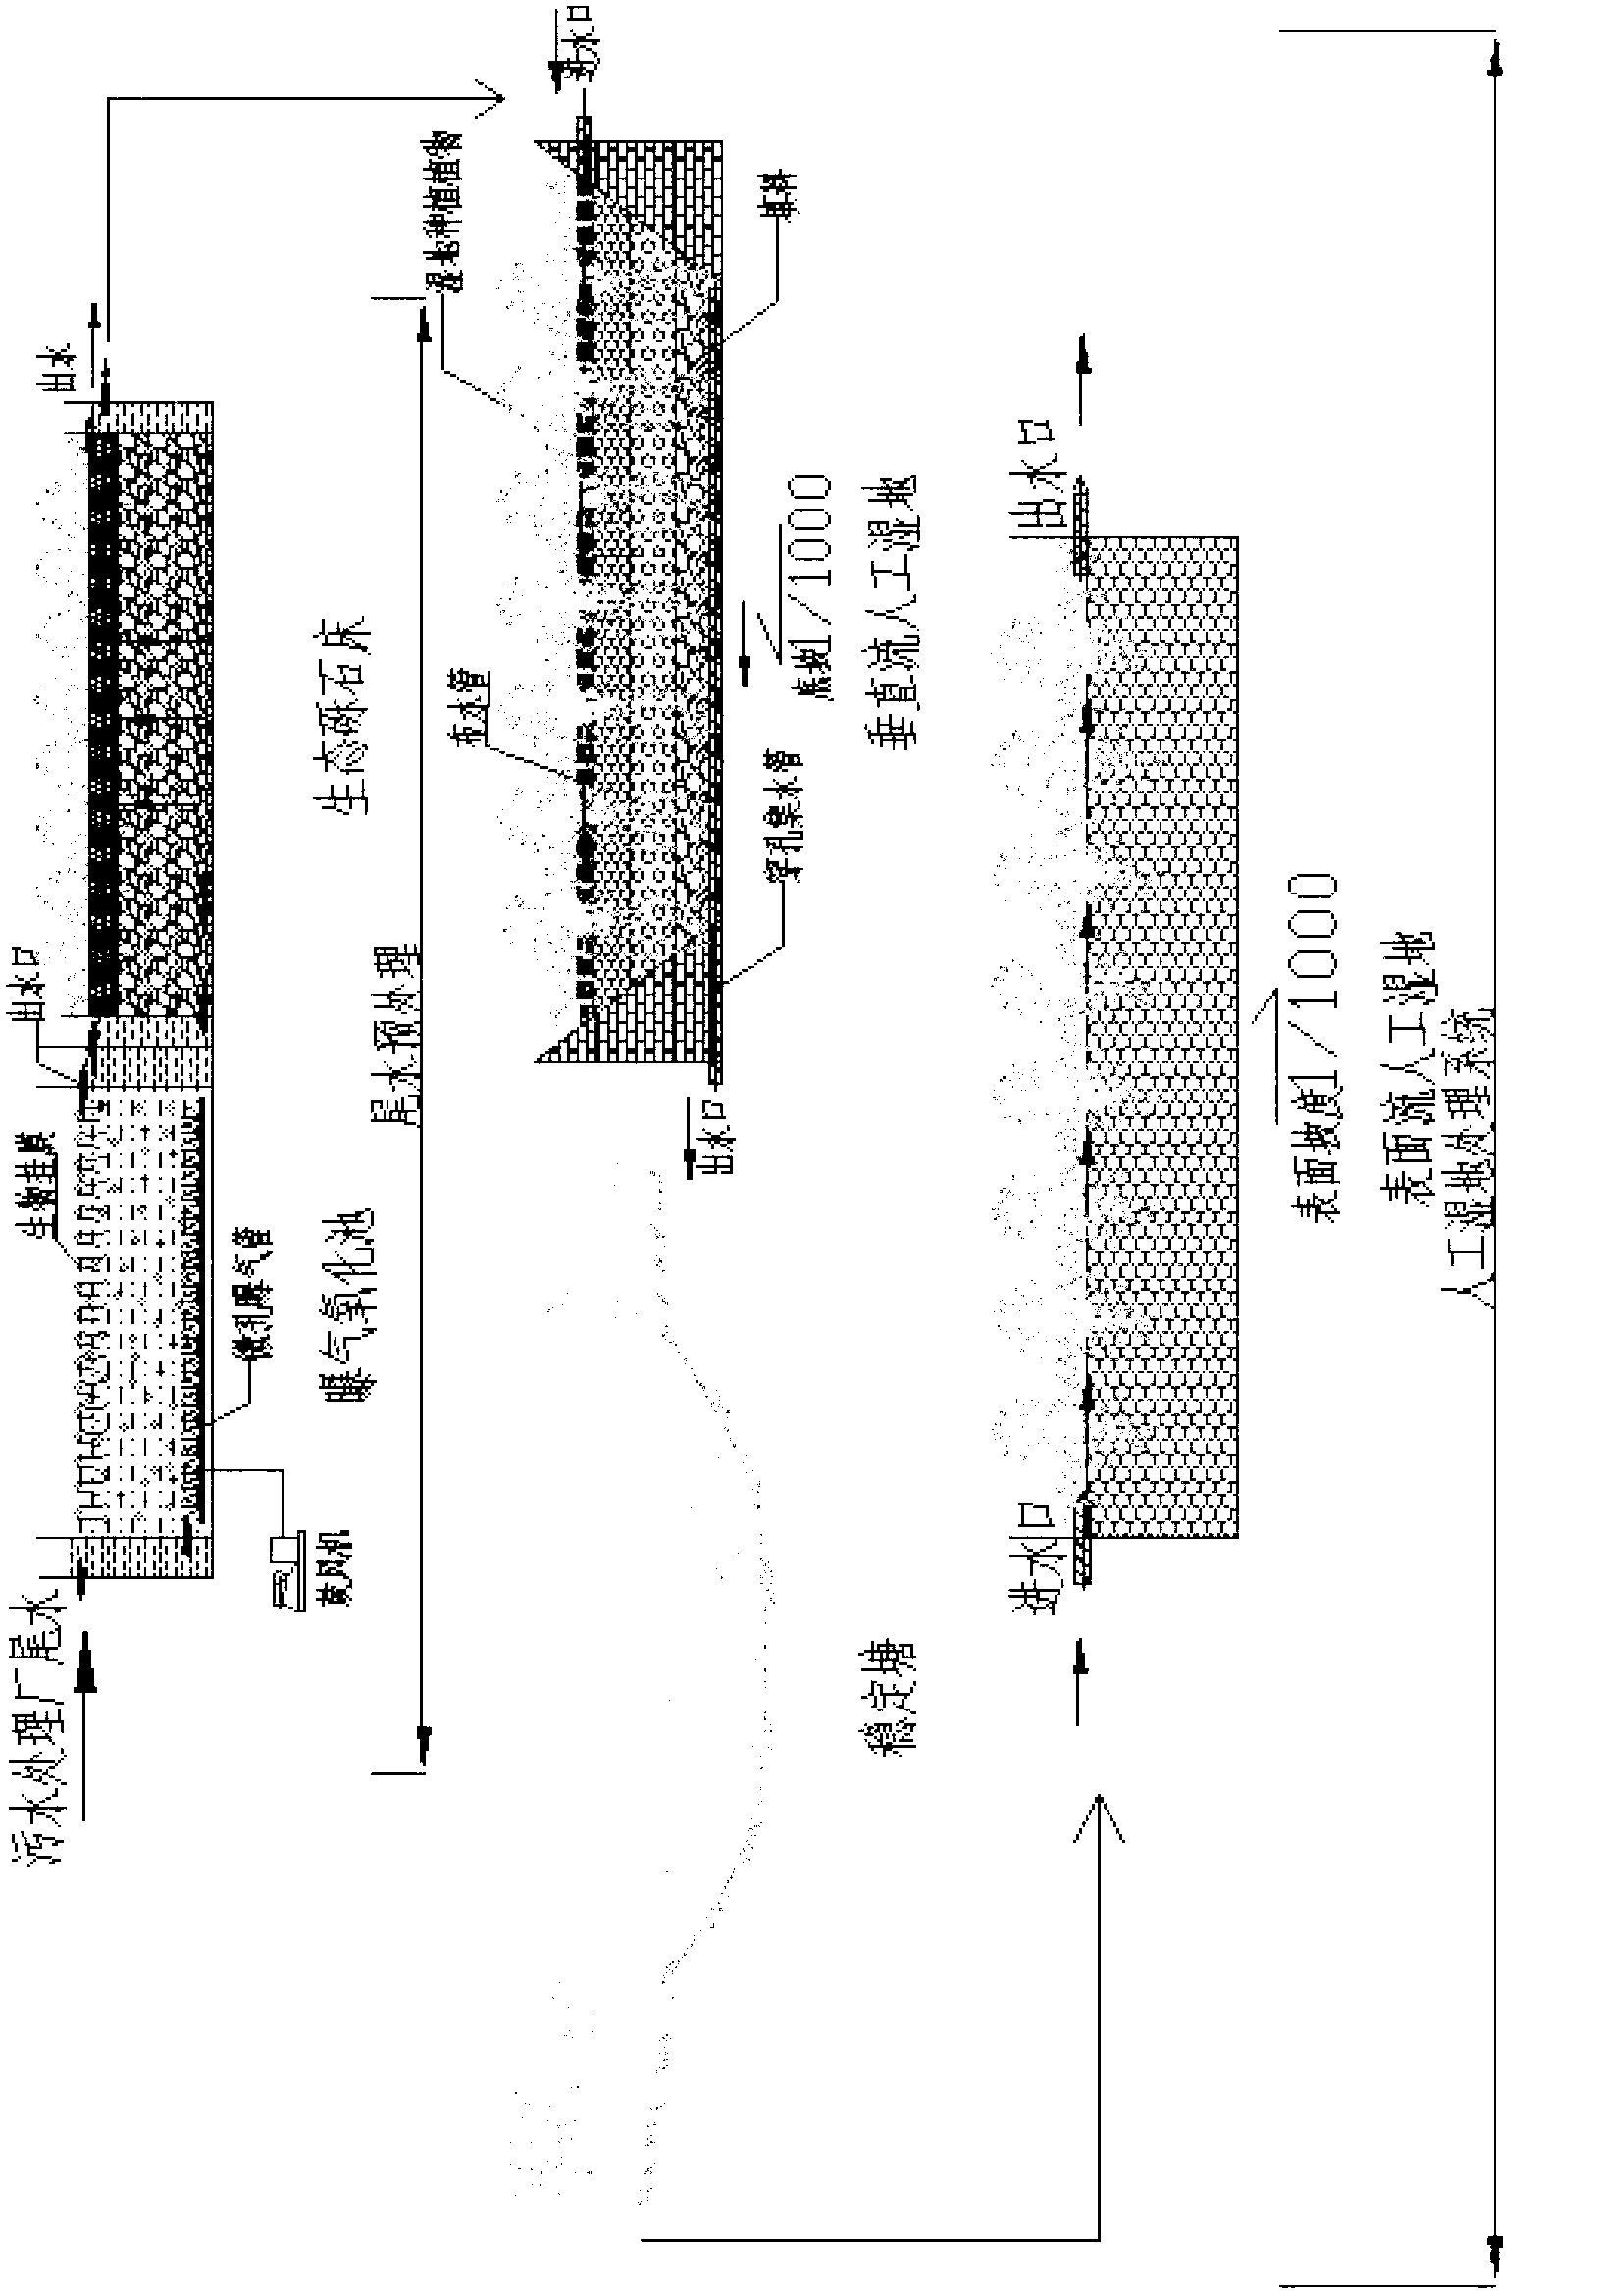 Compound constructed wetland tail water treatment system